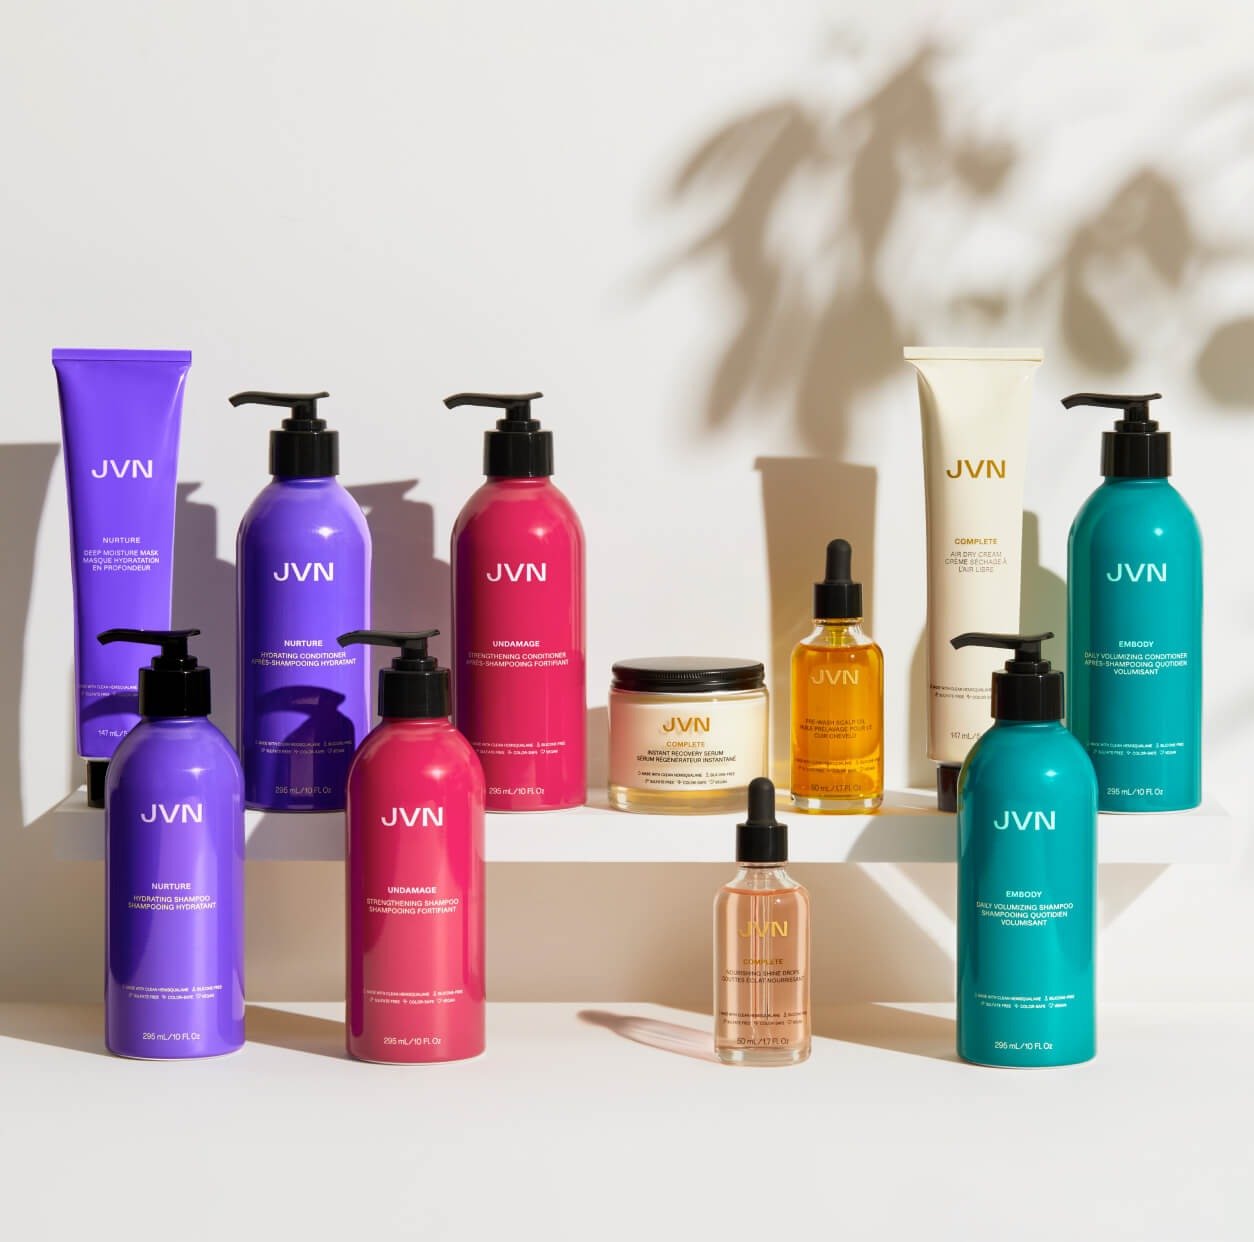 JVN complete collection of hair stylers and treatments with shampoos and conditioners